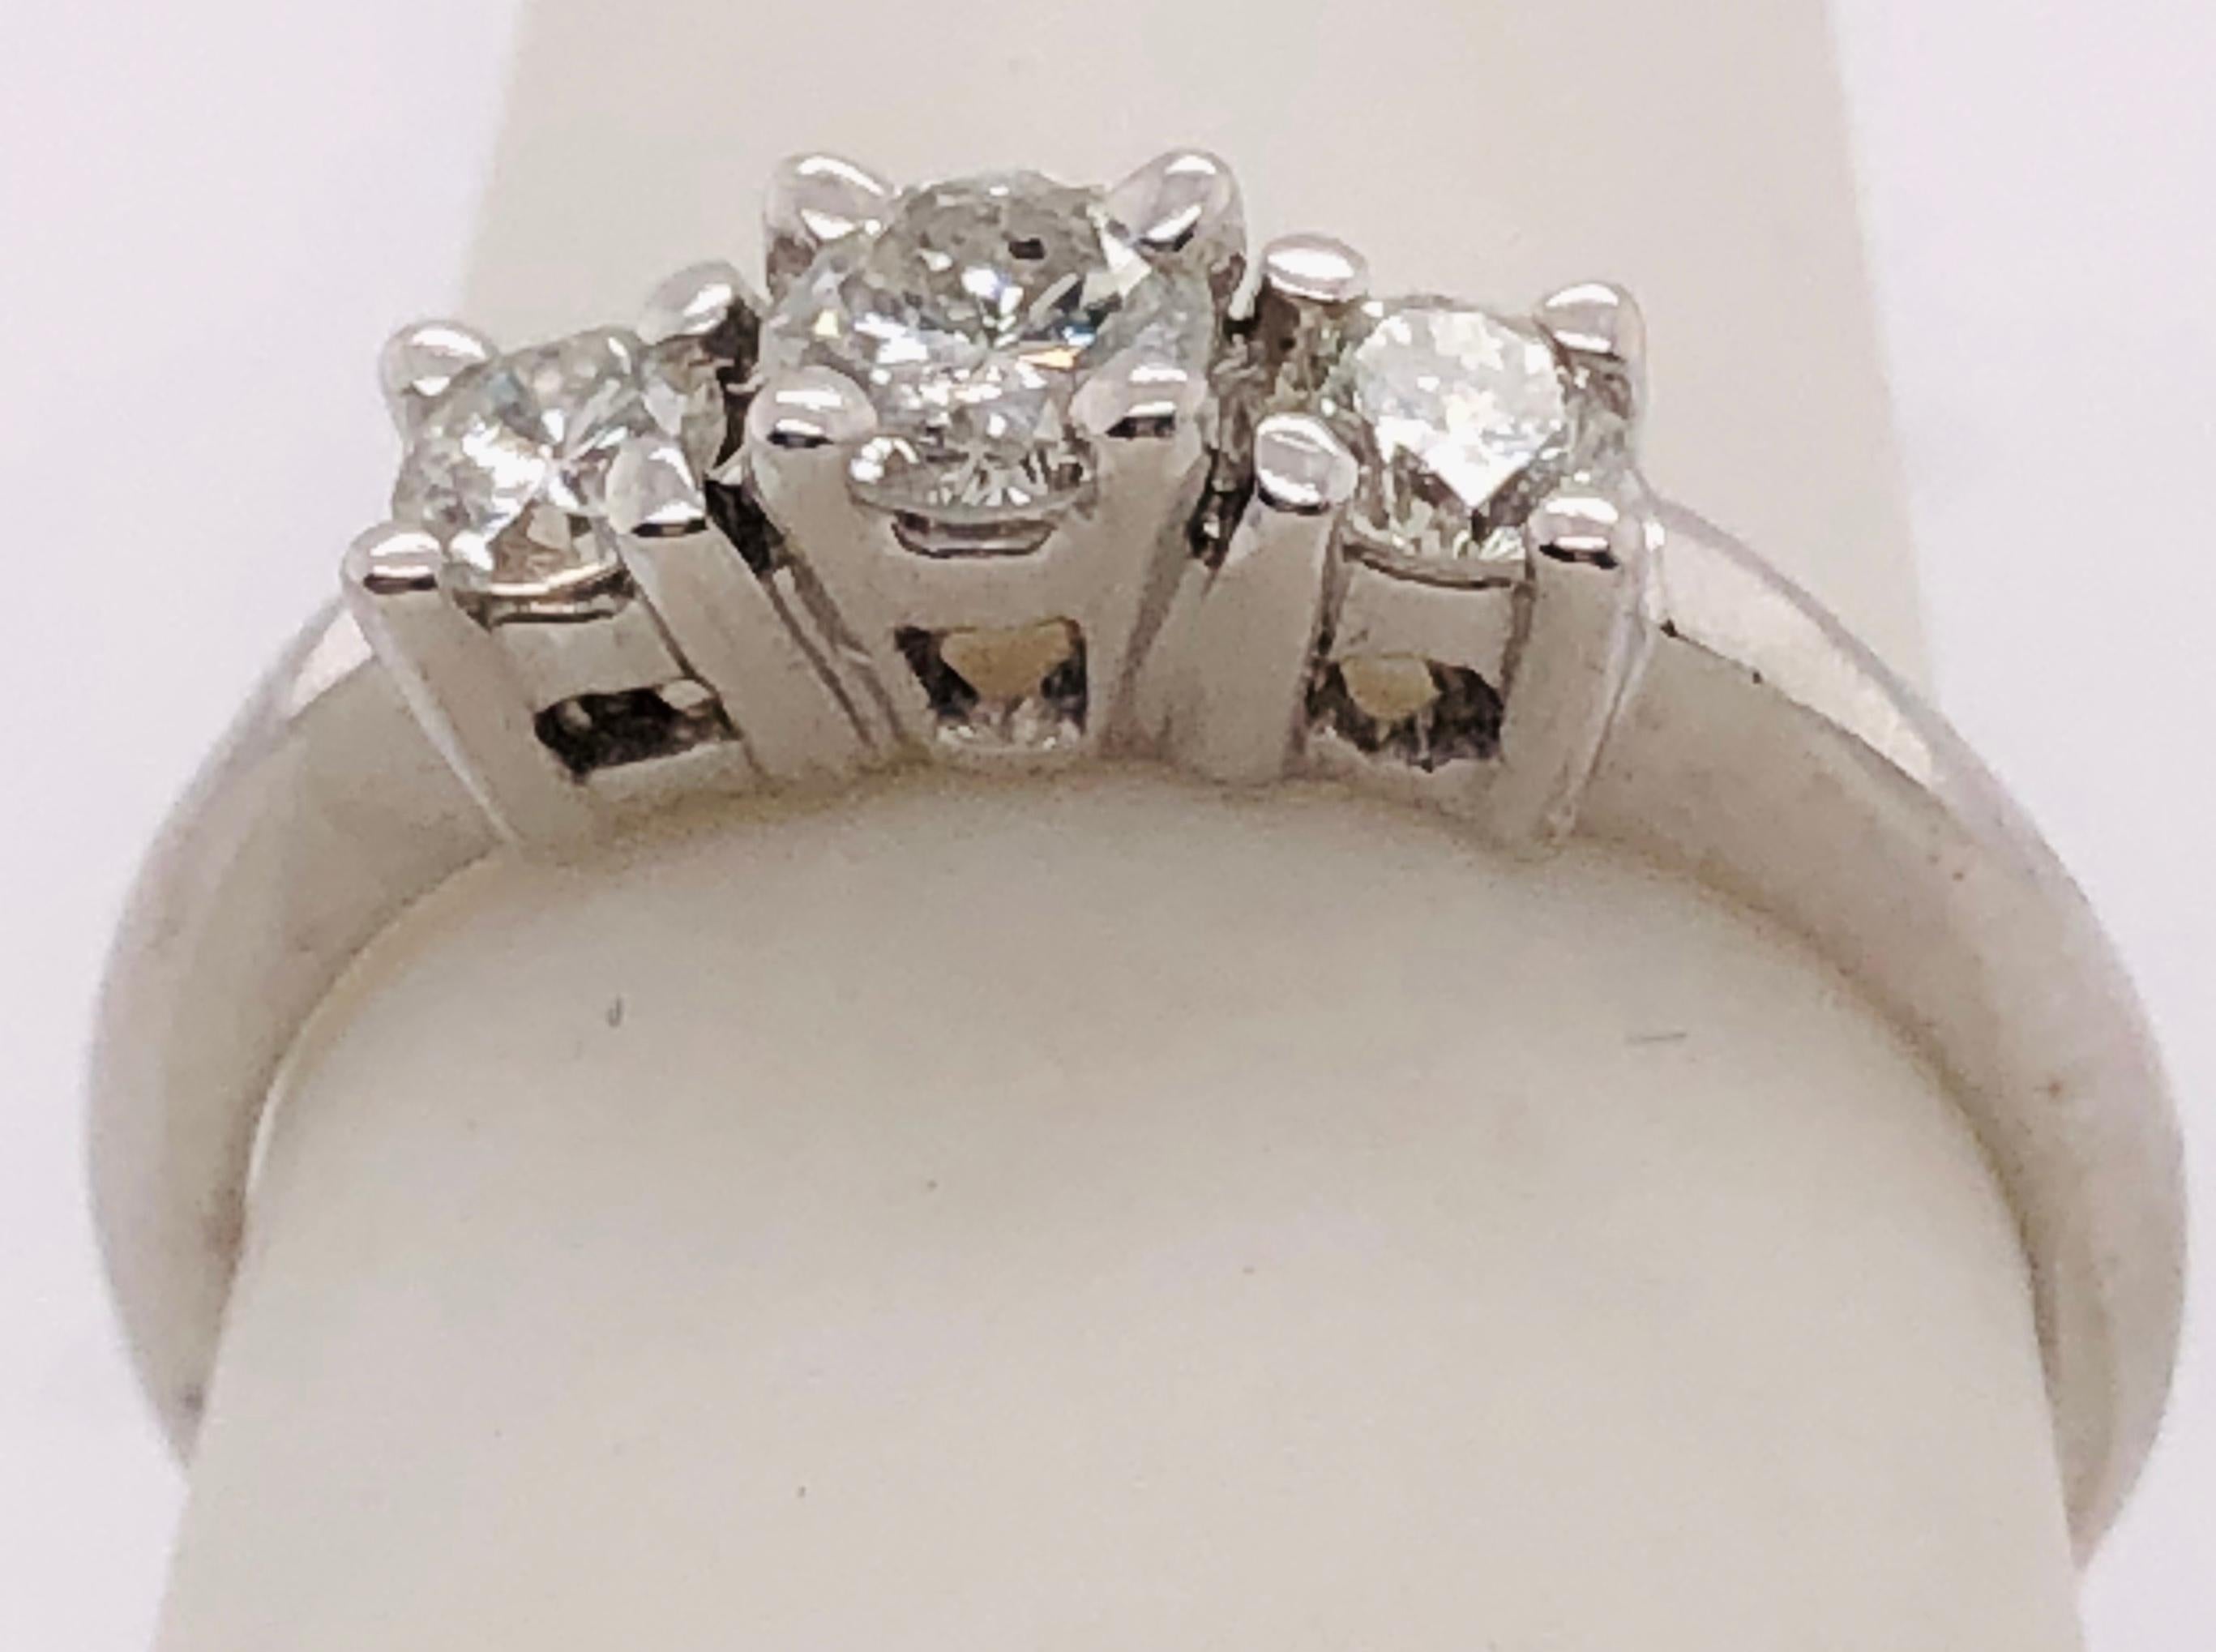 14 Kt White Gold Three Stone Diamond Engagement Anniversary Bridal Ring 0.75 TDW
Size 6.14 
2.62 grams total weight